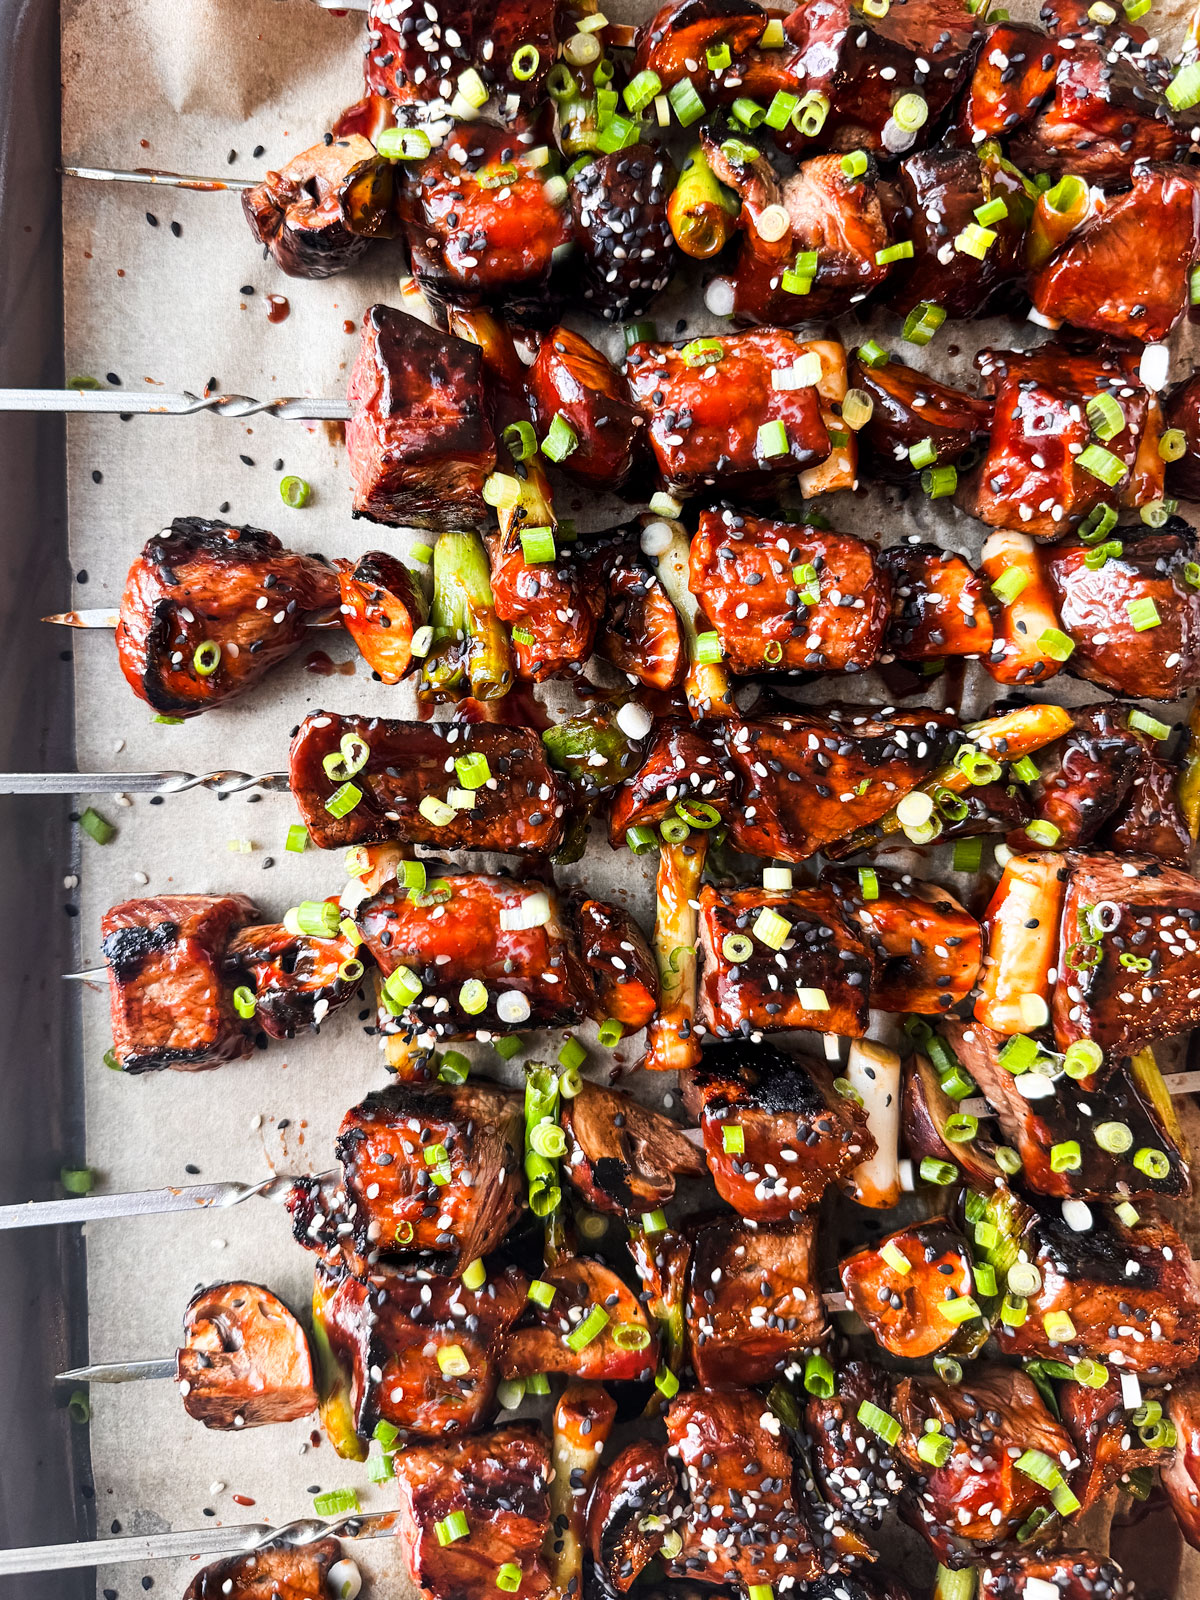 Saucy beef skewers on a baking sheet garnished with chopped scallions.